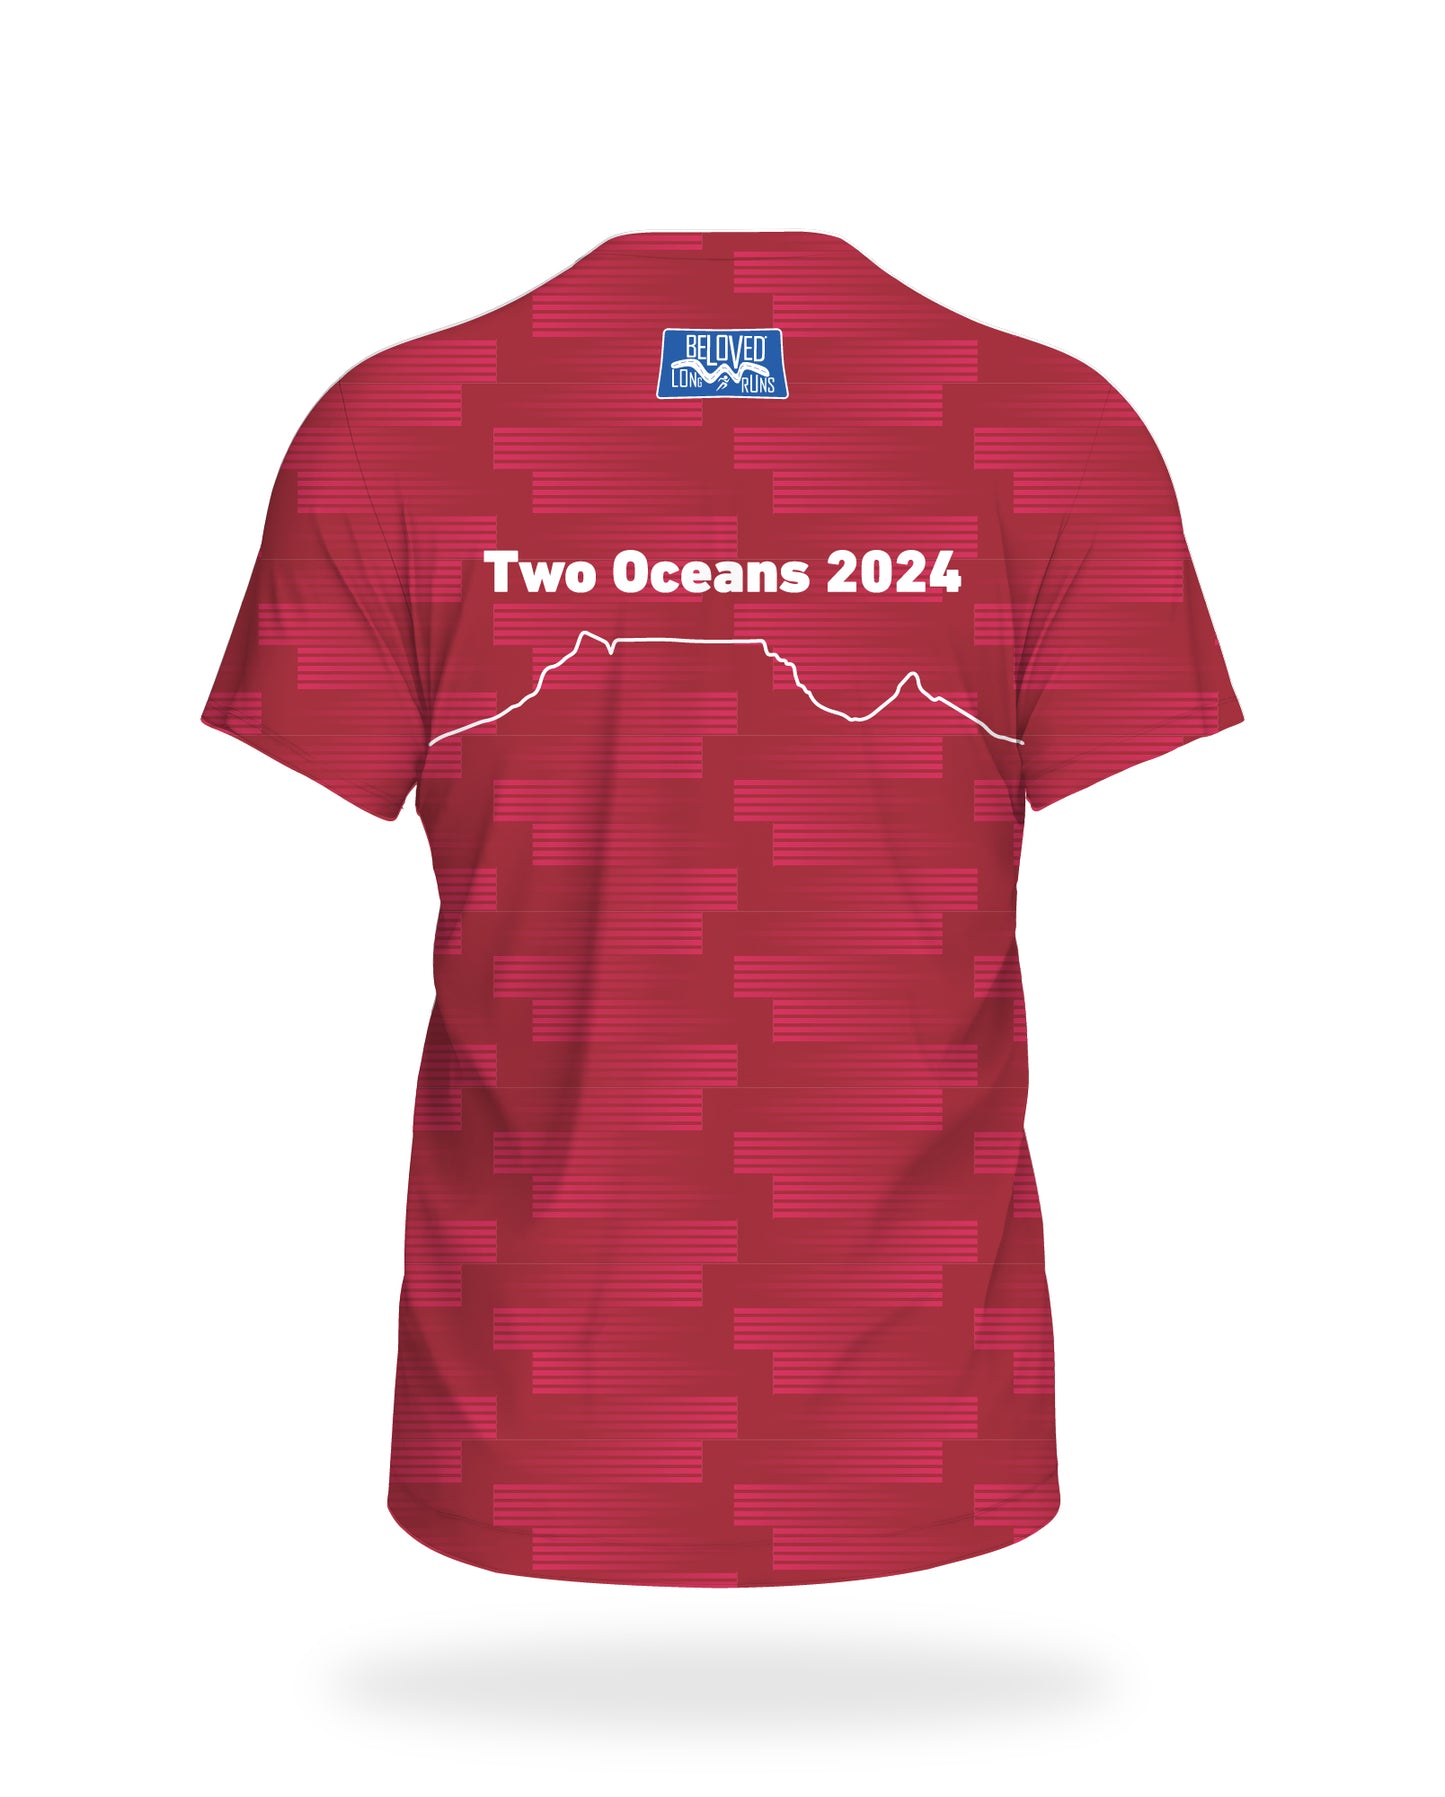 Men's BLR Two Oceans SS Tee -ARRIVING IN TIME FOR TWO OCEANS - PRE ORDER NOW